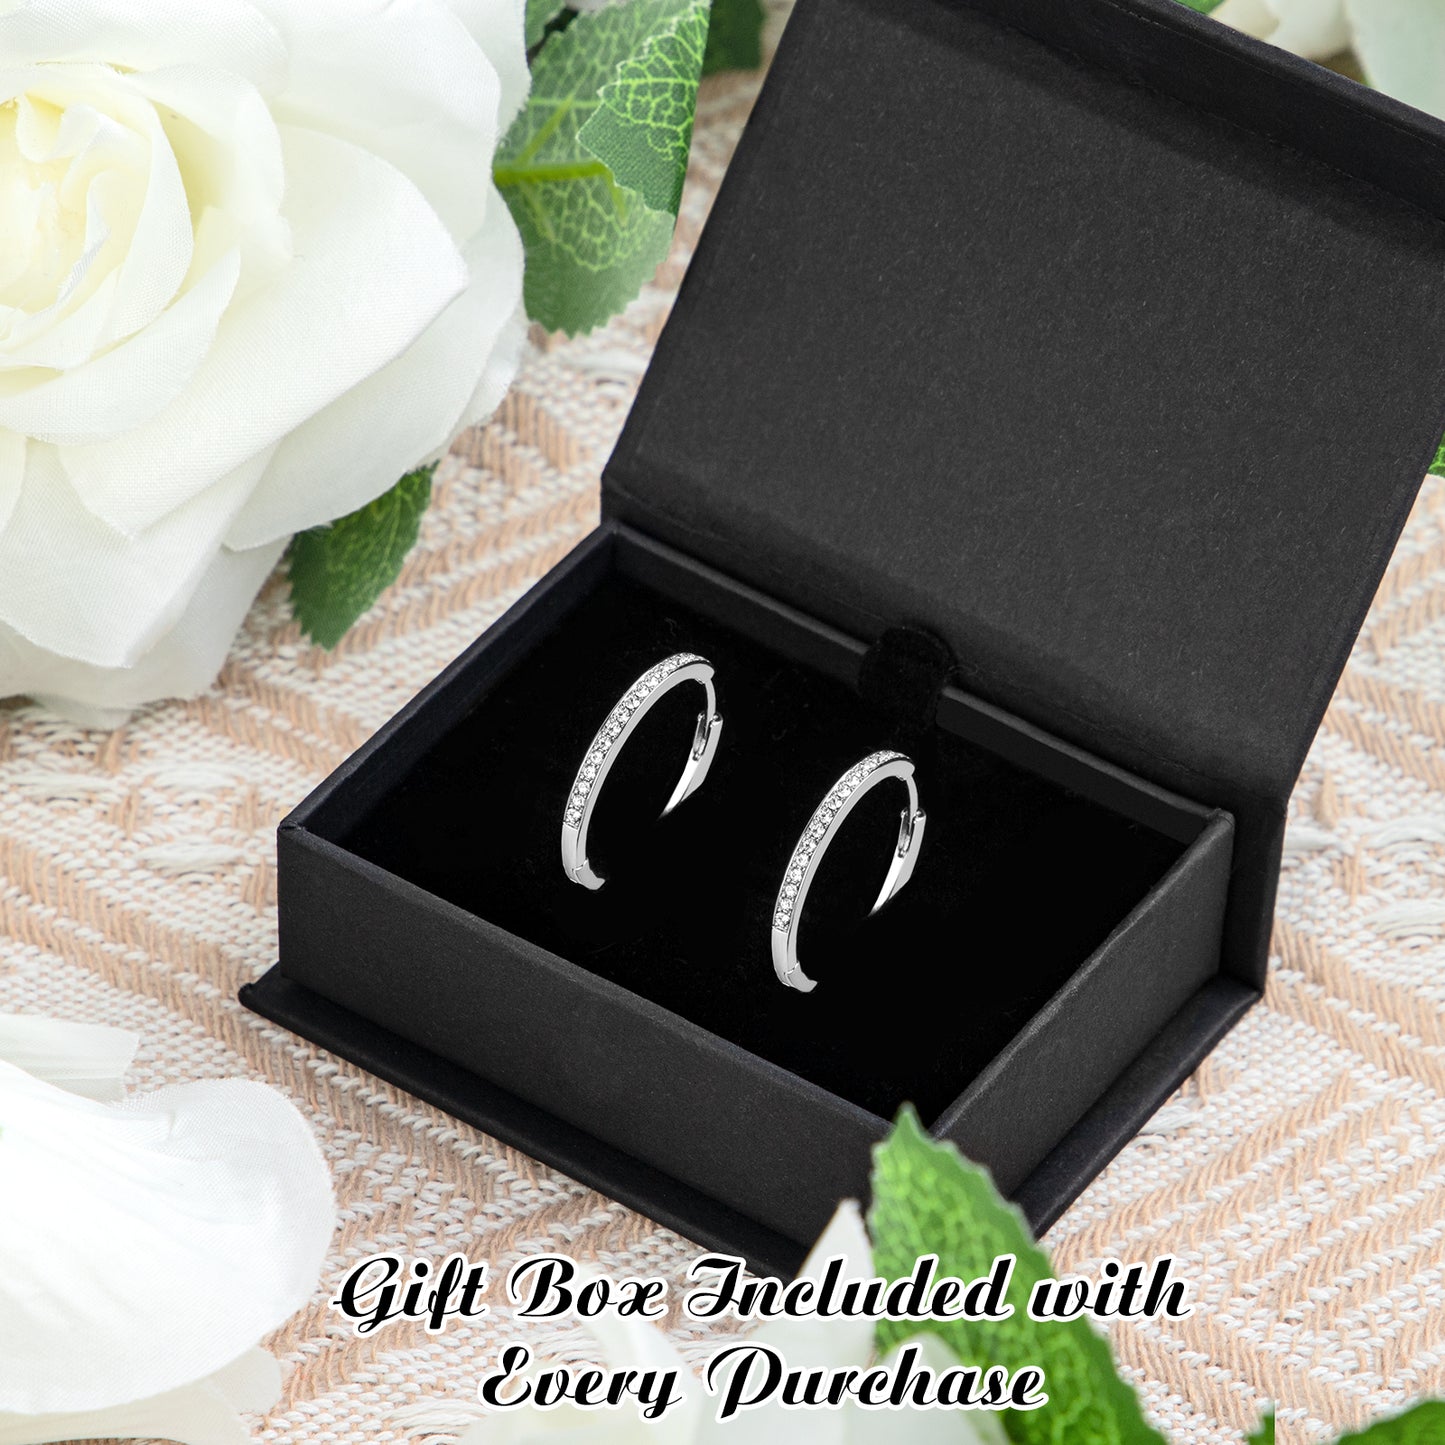 Loritta 18k White Gold Hoop Earrings Female Gewelry with Swarovski Crystals Best Gift for Mother's Day